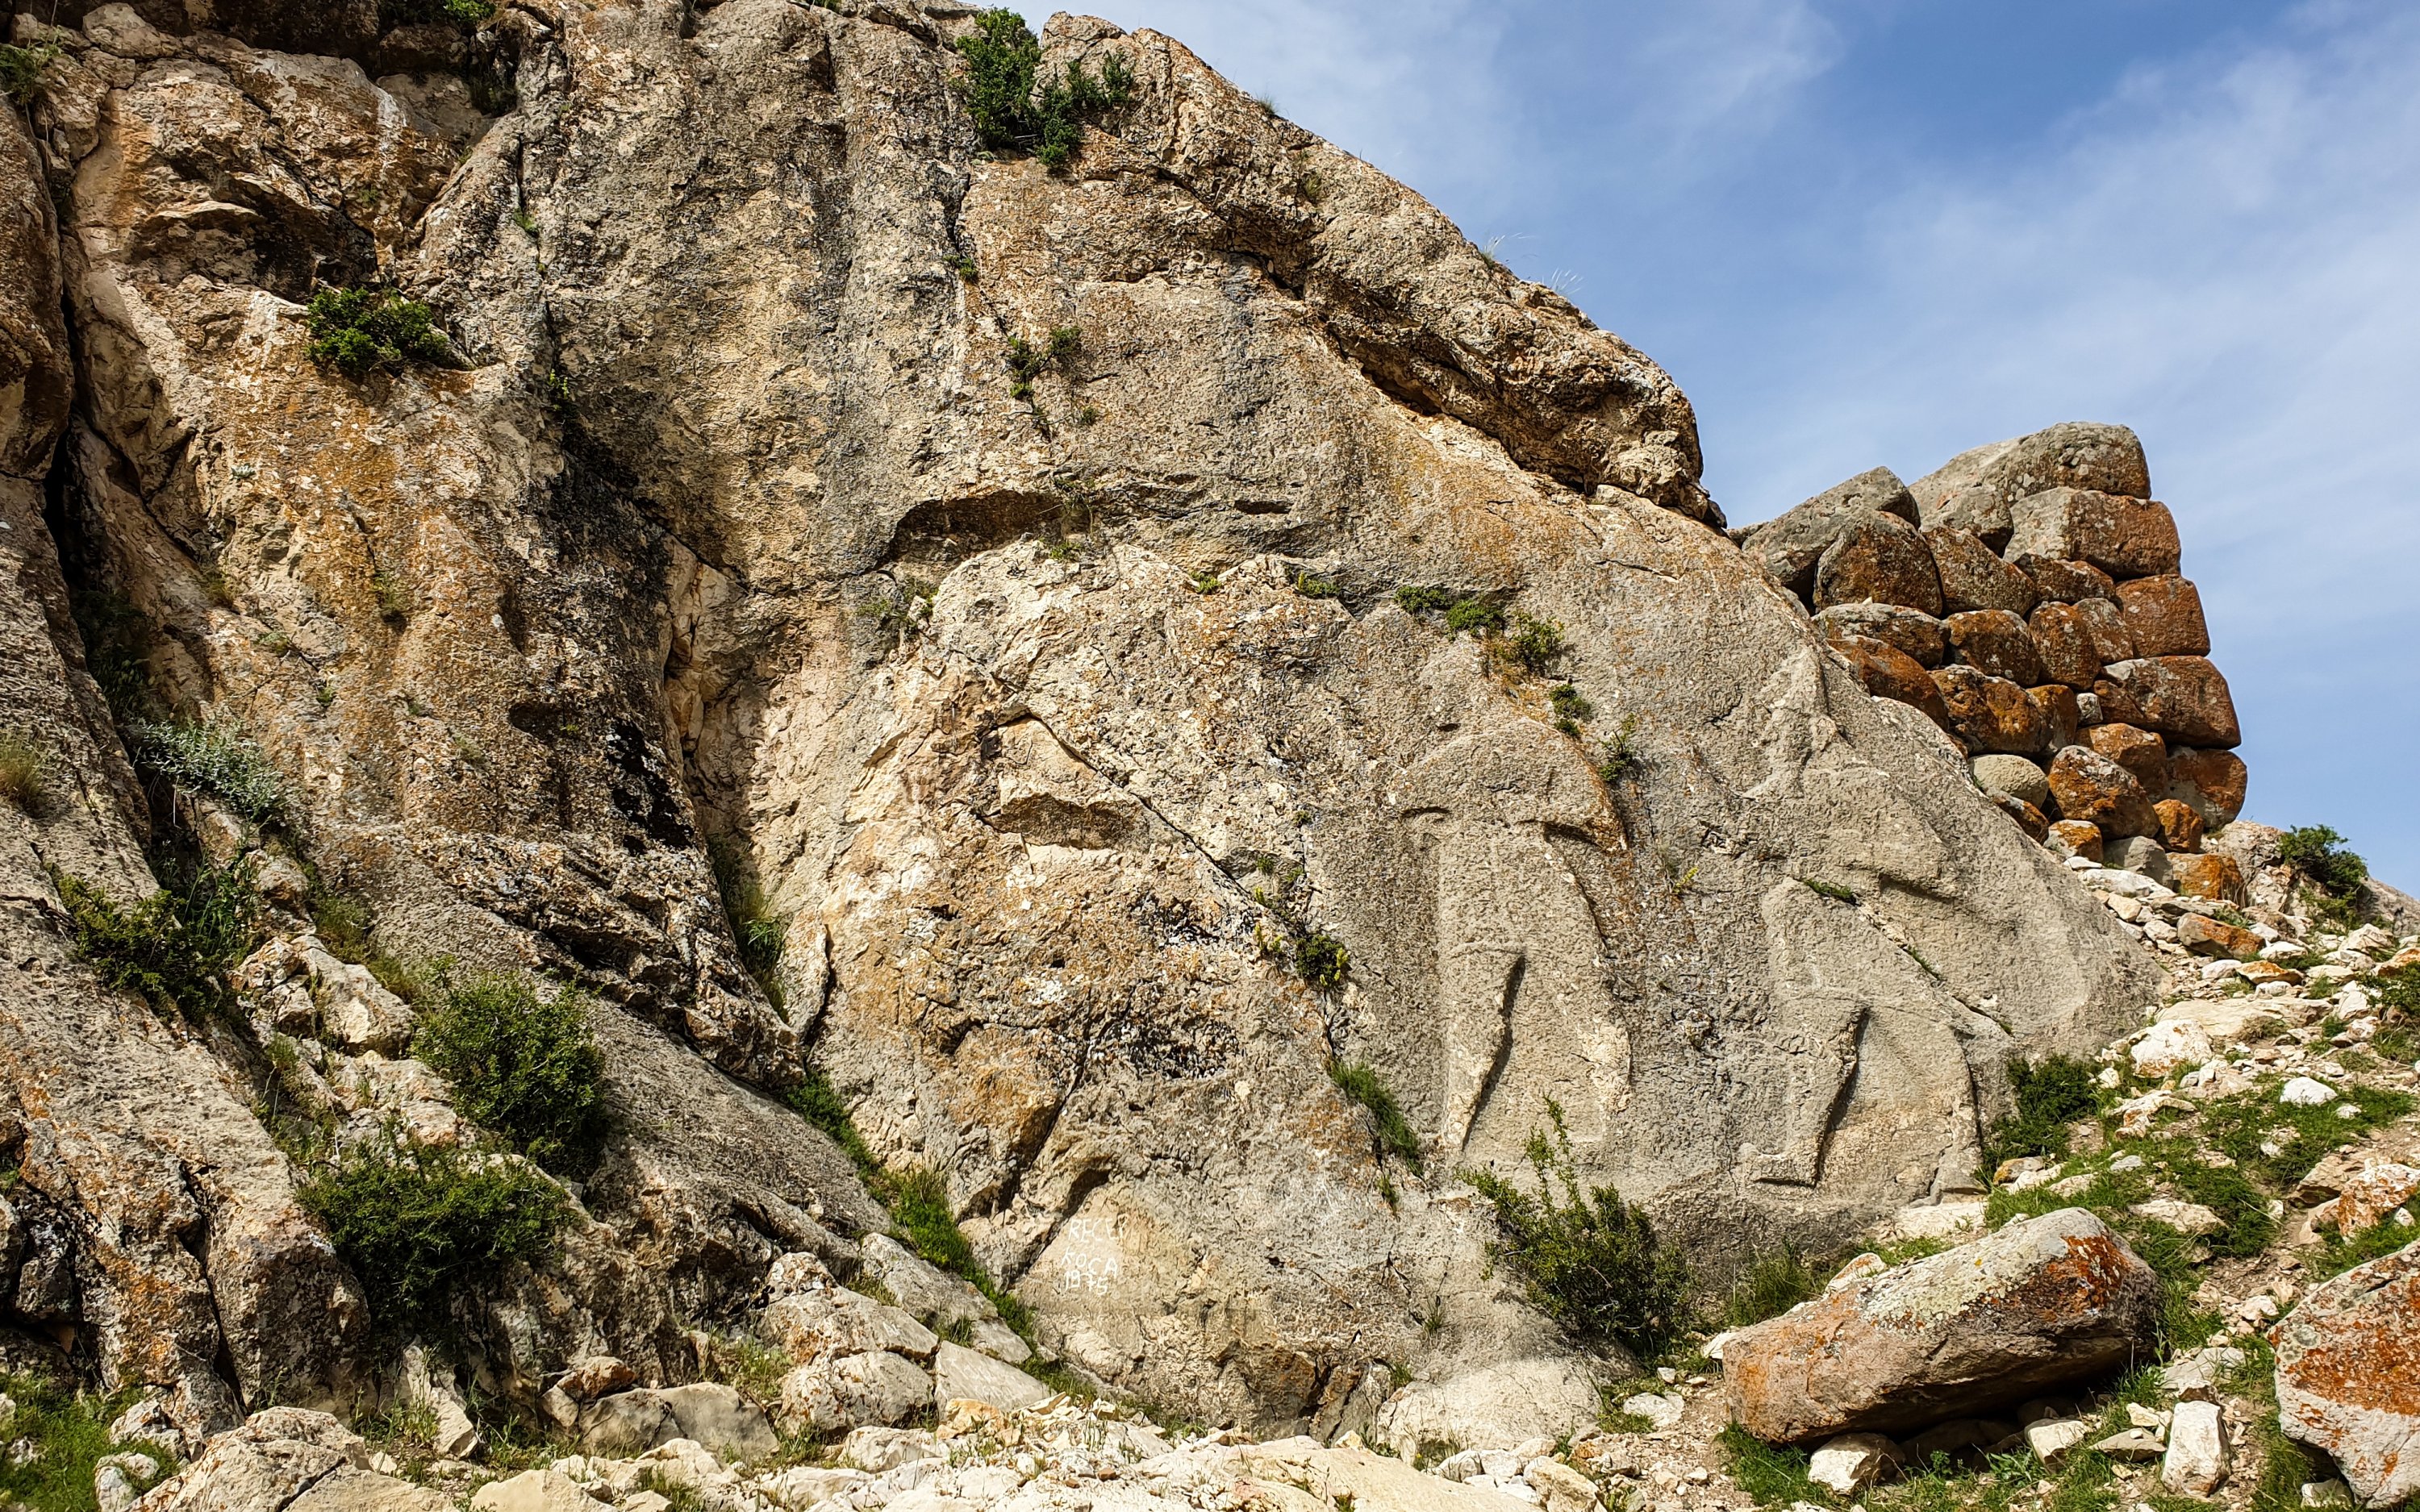 The reliefs of warriors on rocks and the walls of the Hittite castle. (Photo by Argun Konuk)